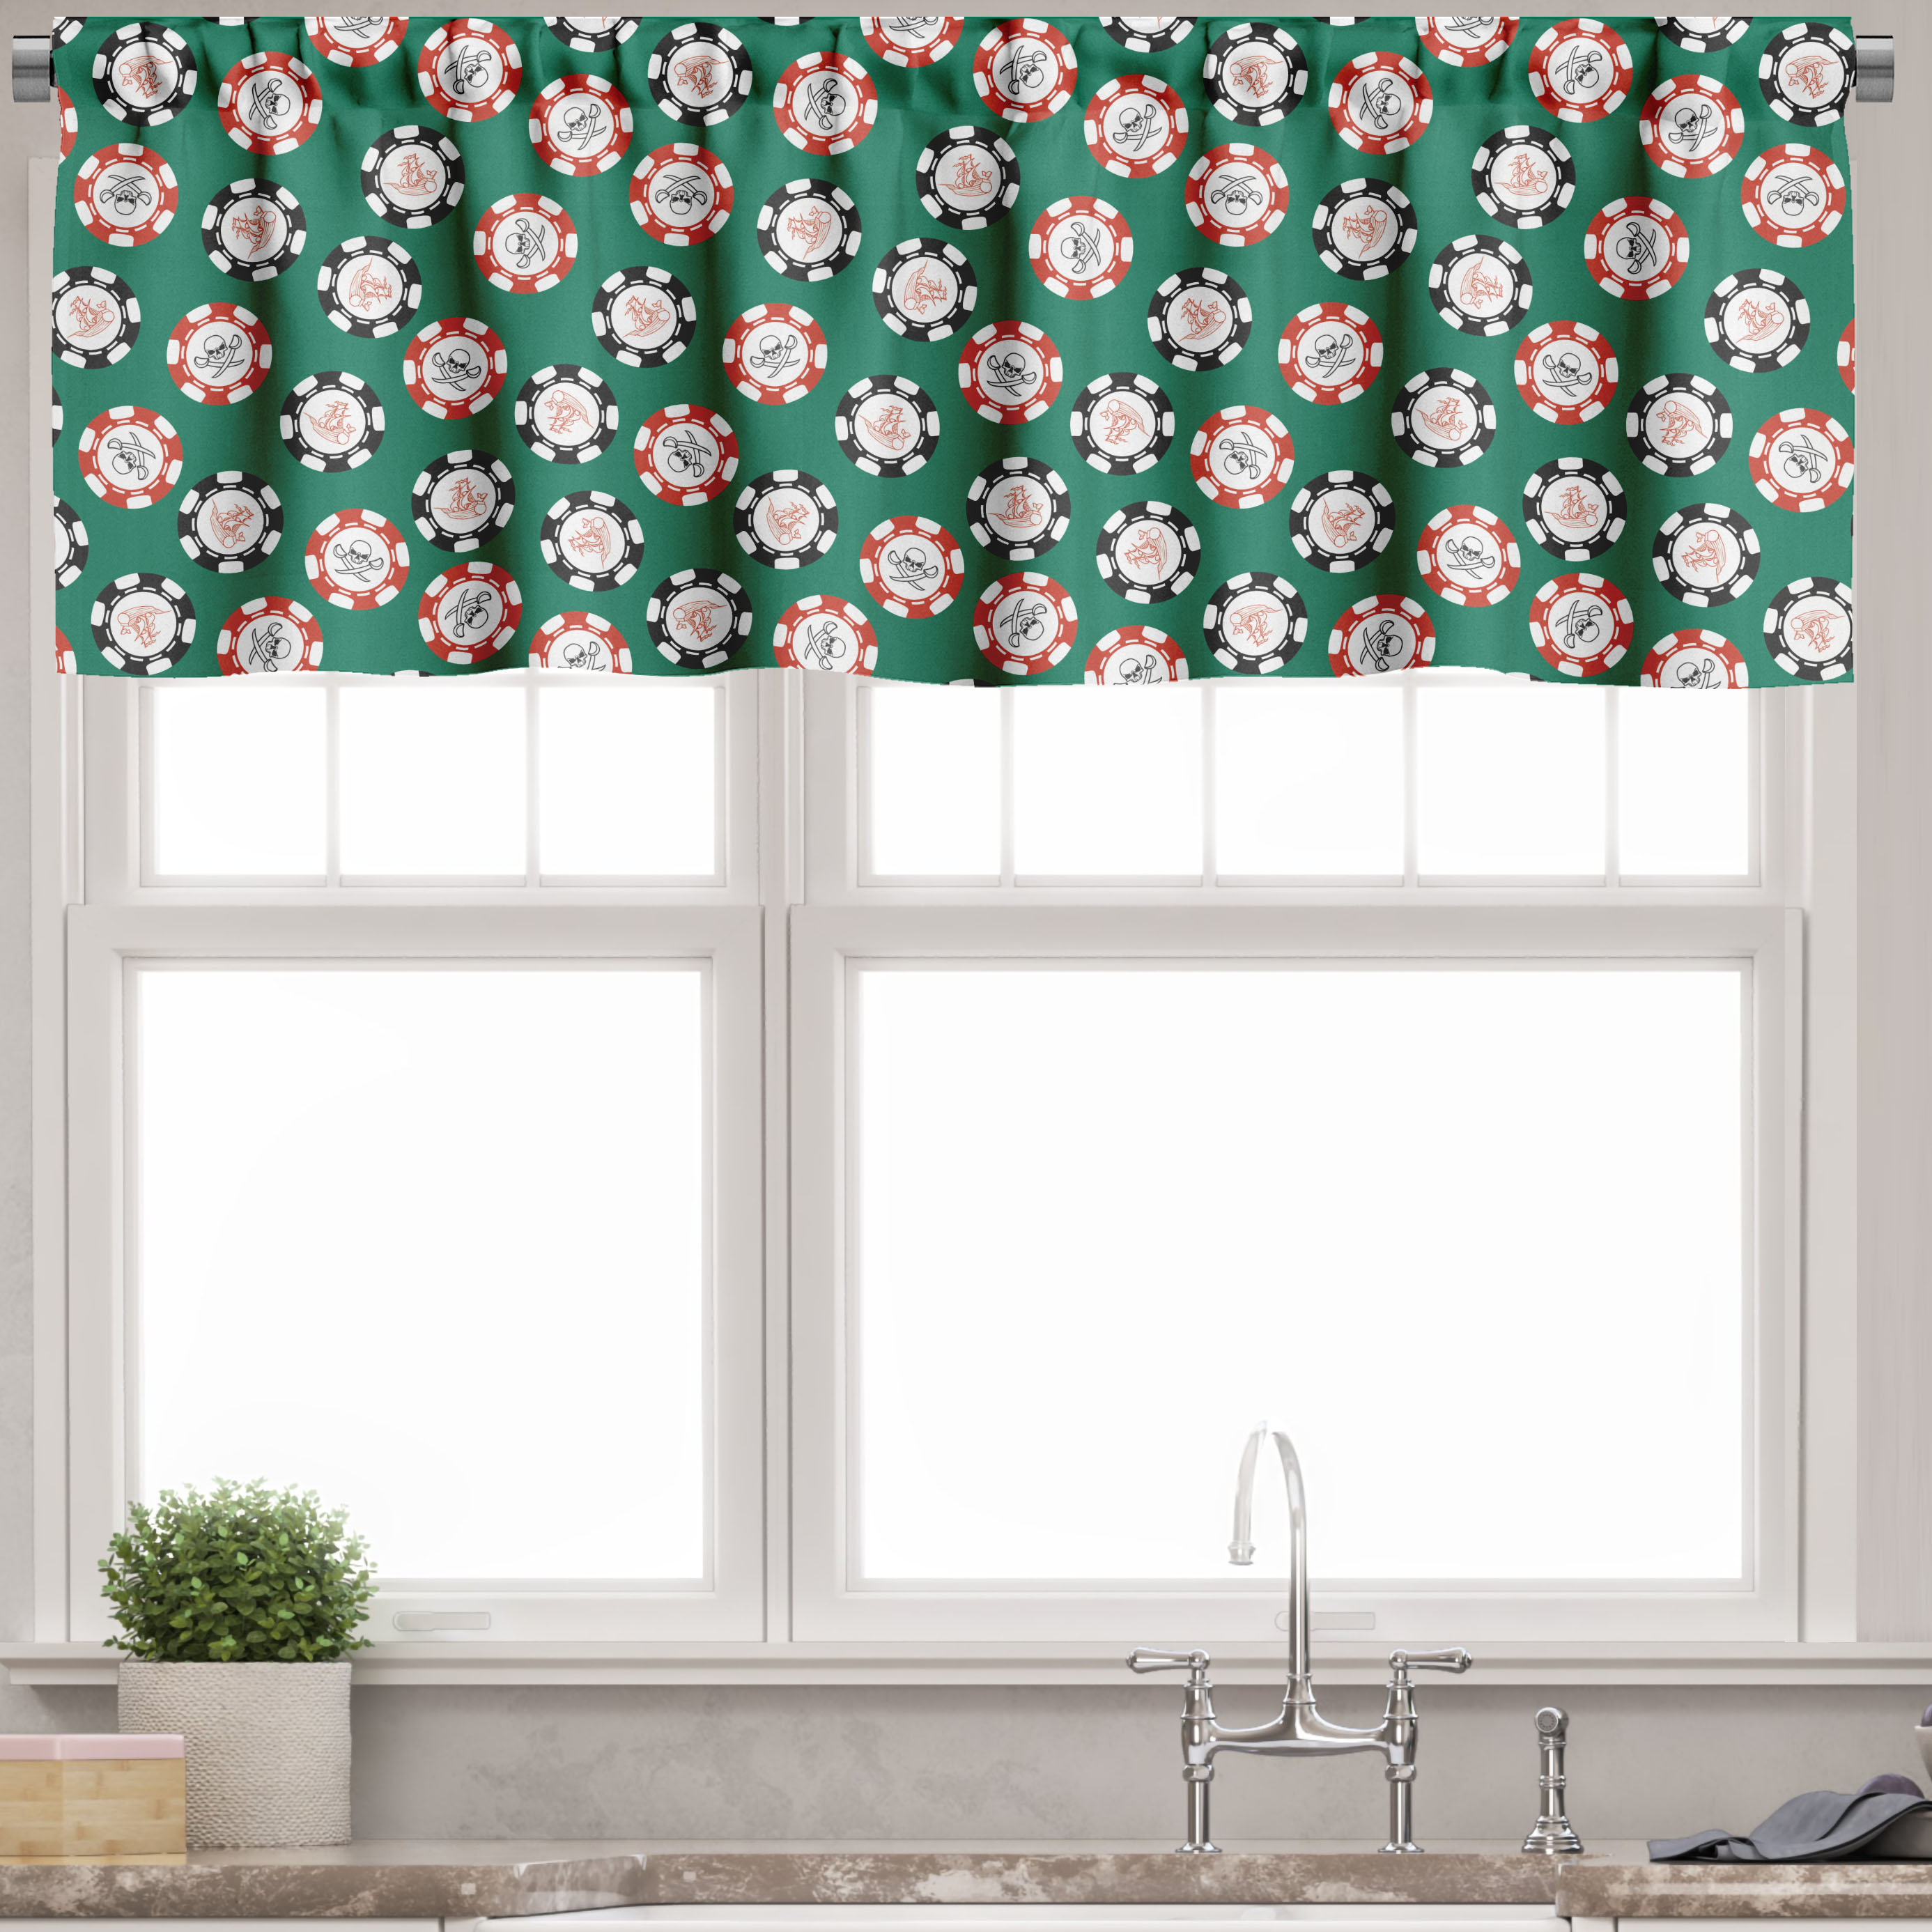 Ambesonne Green Black Window Valance, Chips Pirate, 54" X 12", Jade Green Red - image 1 of 5